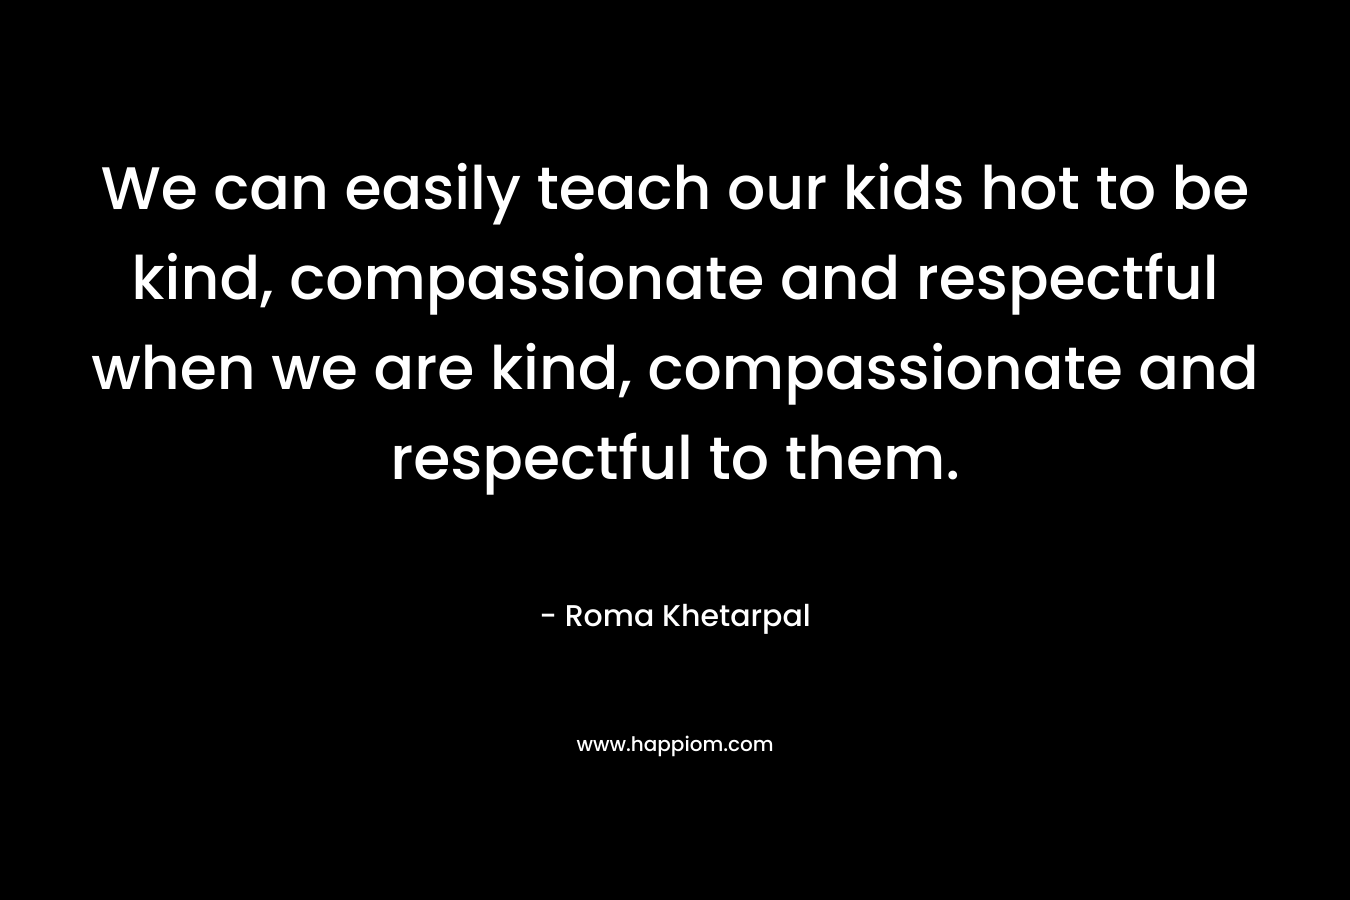 We can easily teach our kids hot to be kind, compassionate and respectful when we are kind, compassionate and respectful to them.